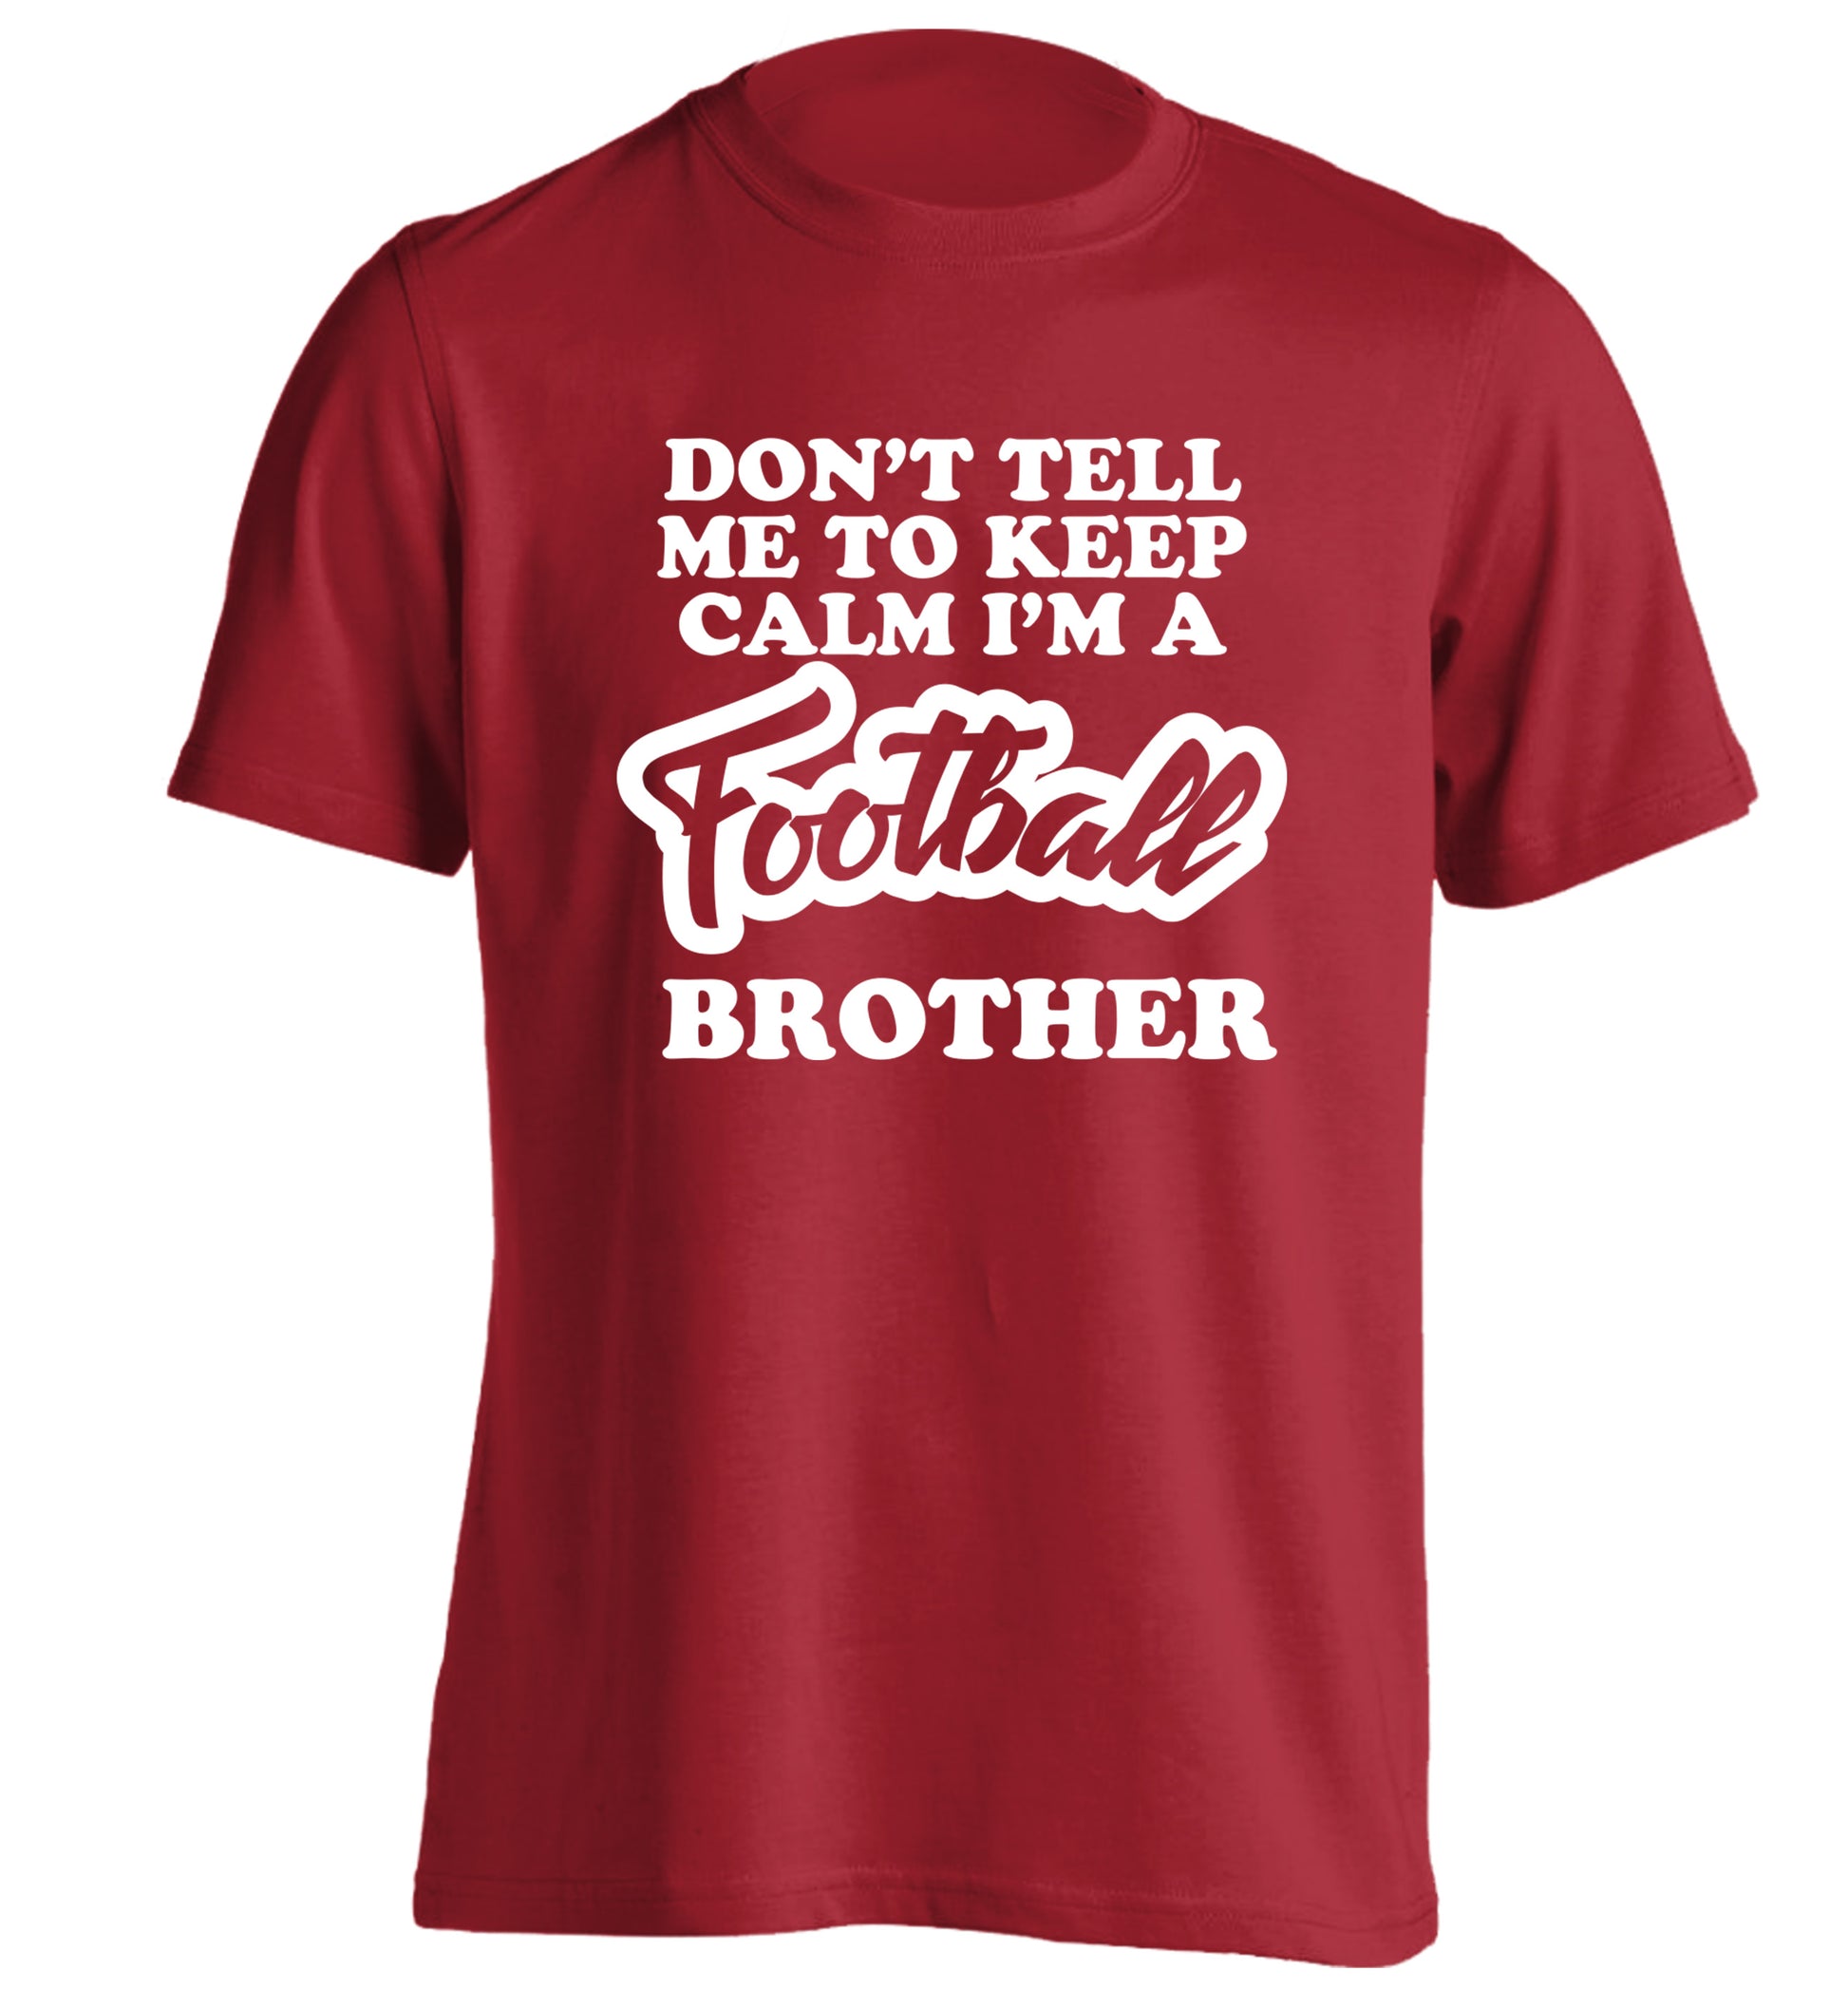 Don't tell me to keep calm I'm a football brother adults unisexred Tshirt 2XL